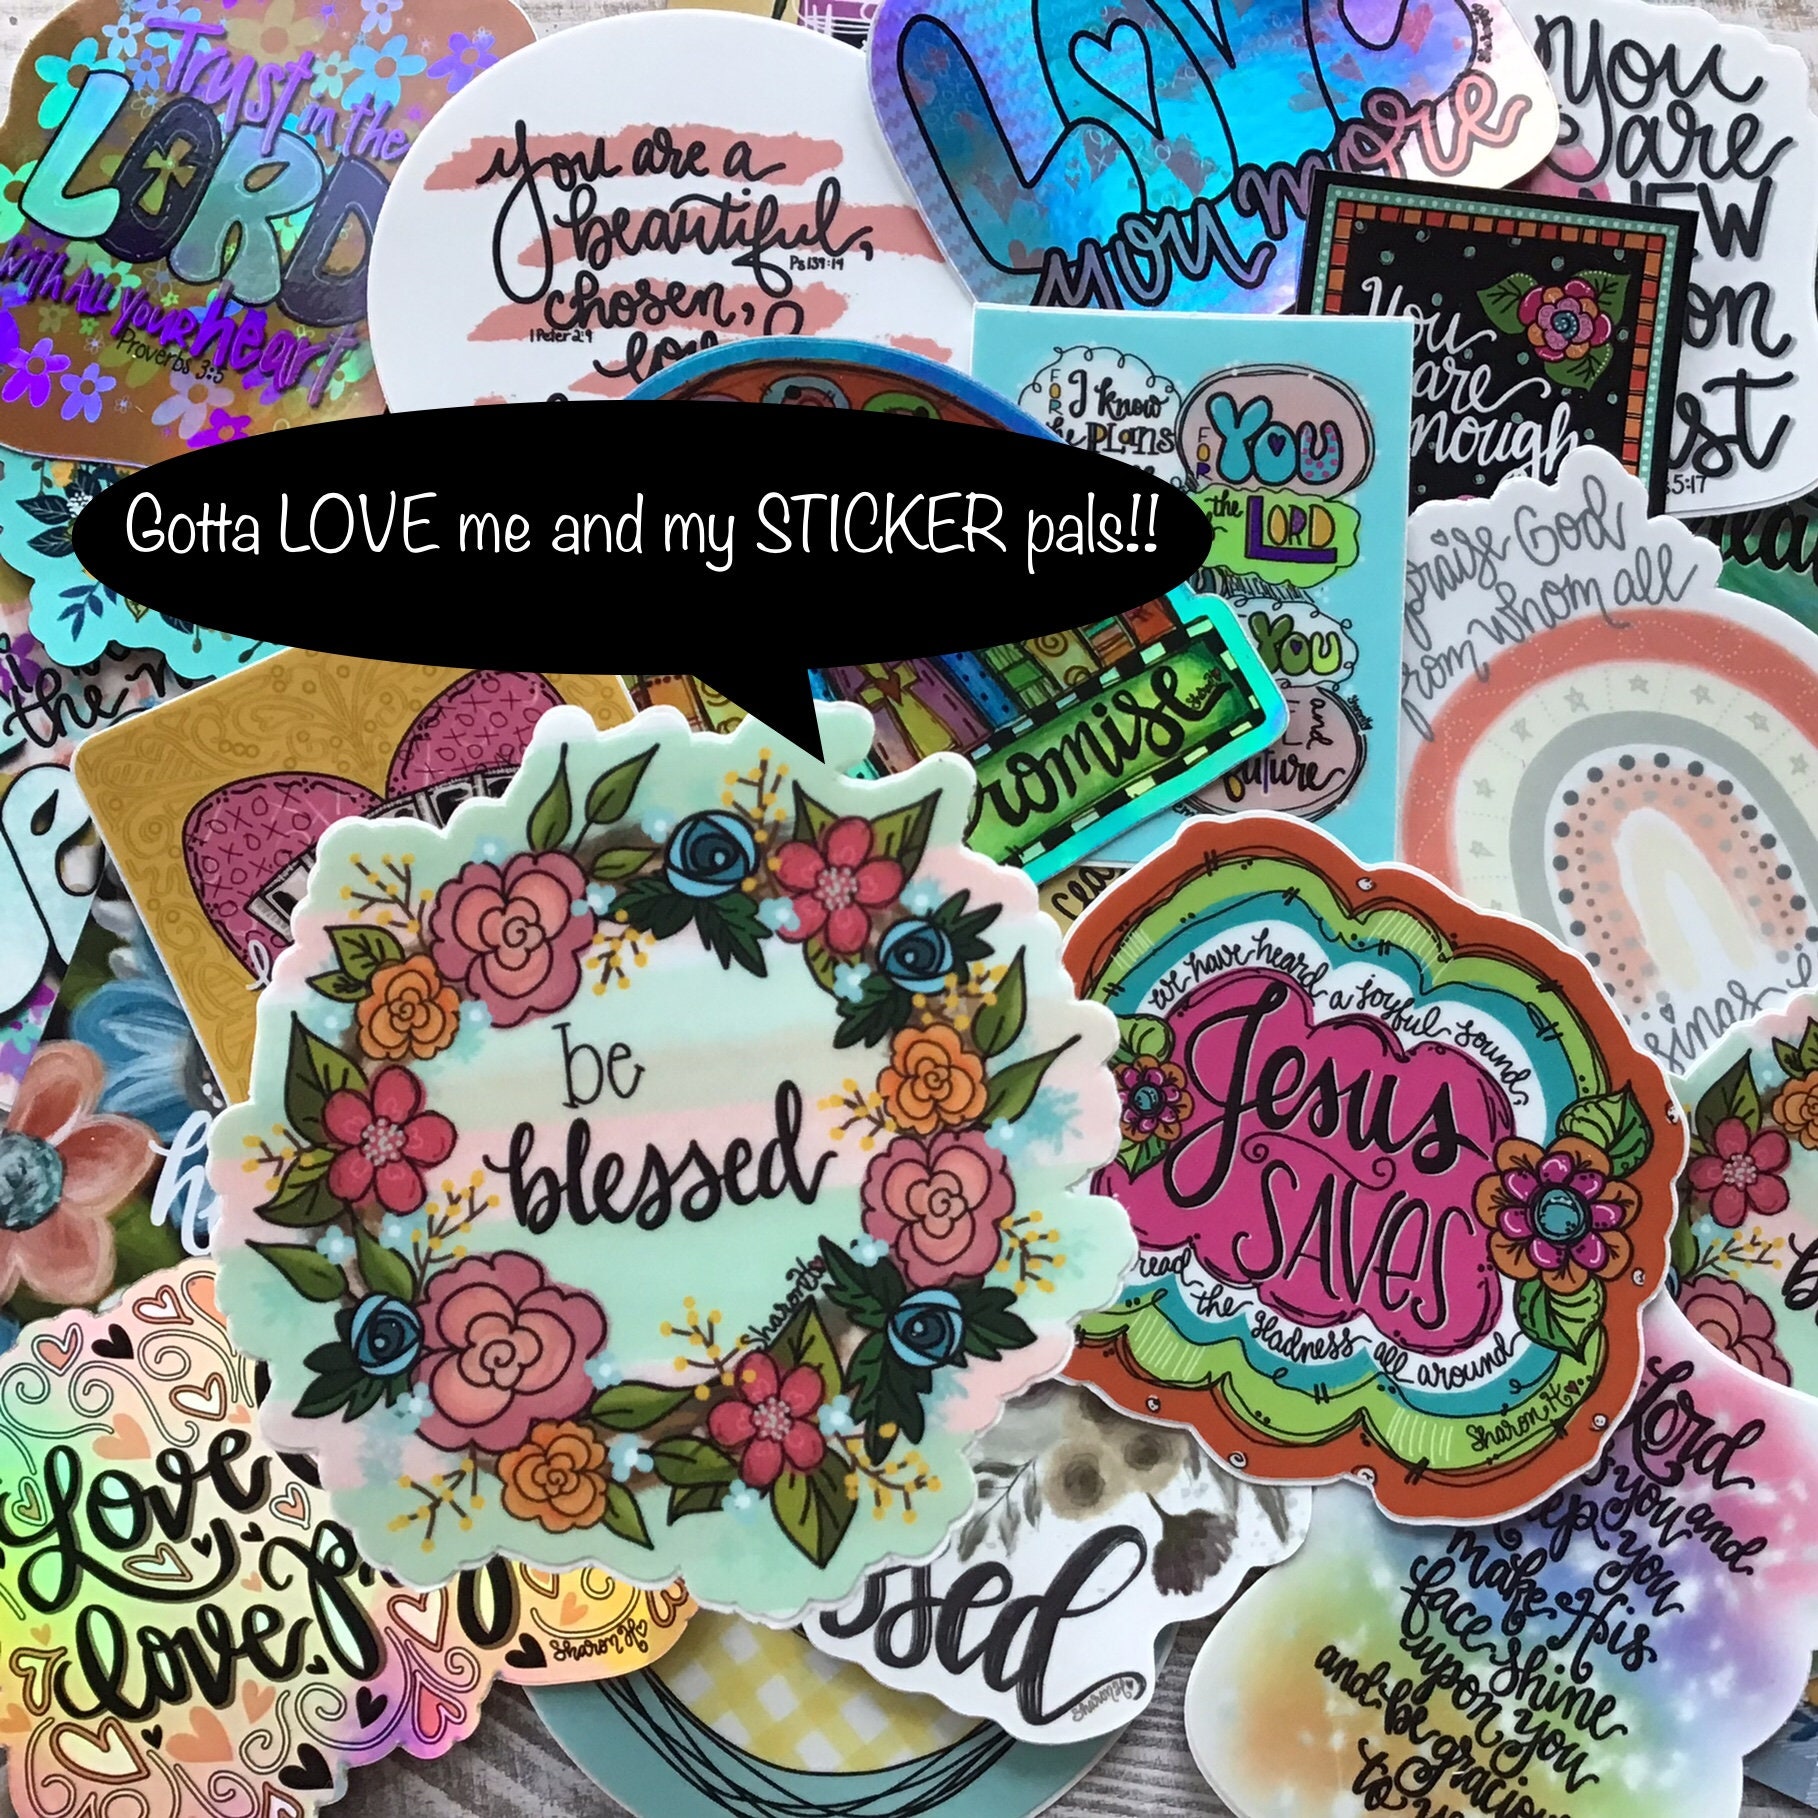 Stickers Pack Of 7, Inspirational Stickers, Motivational Stickers